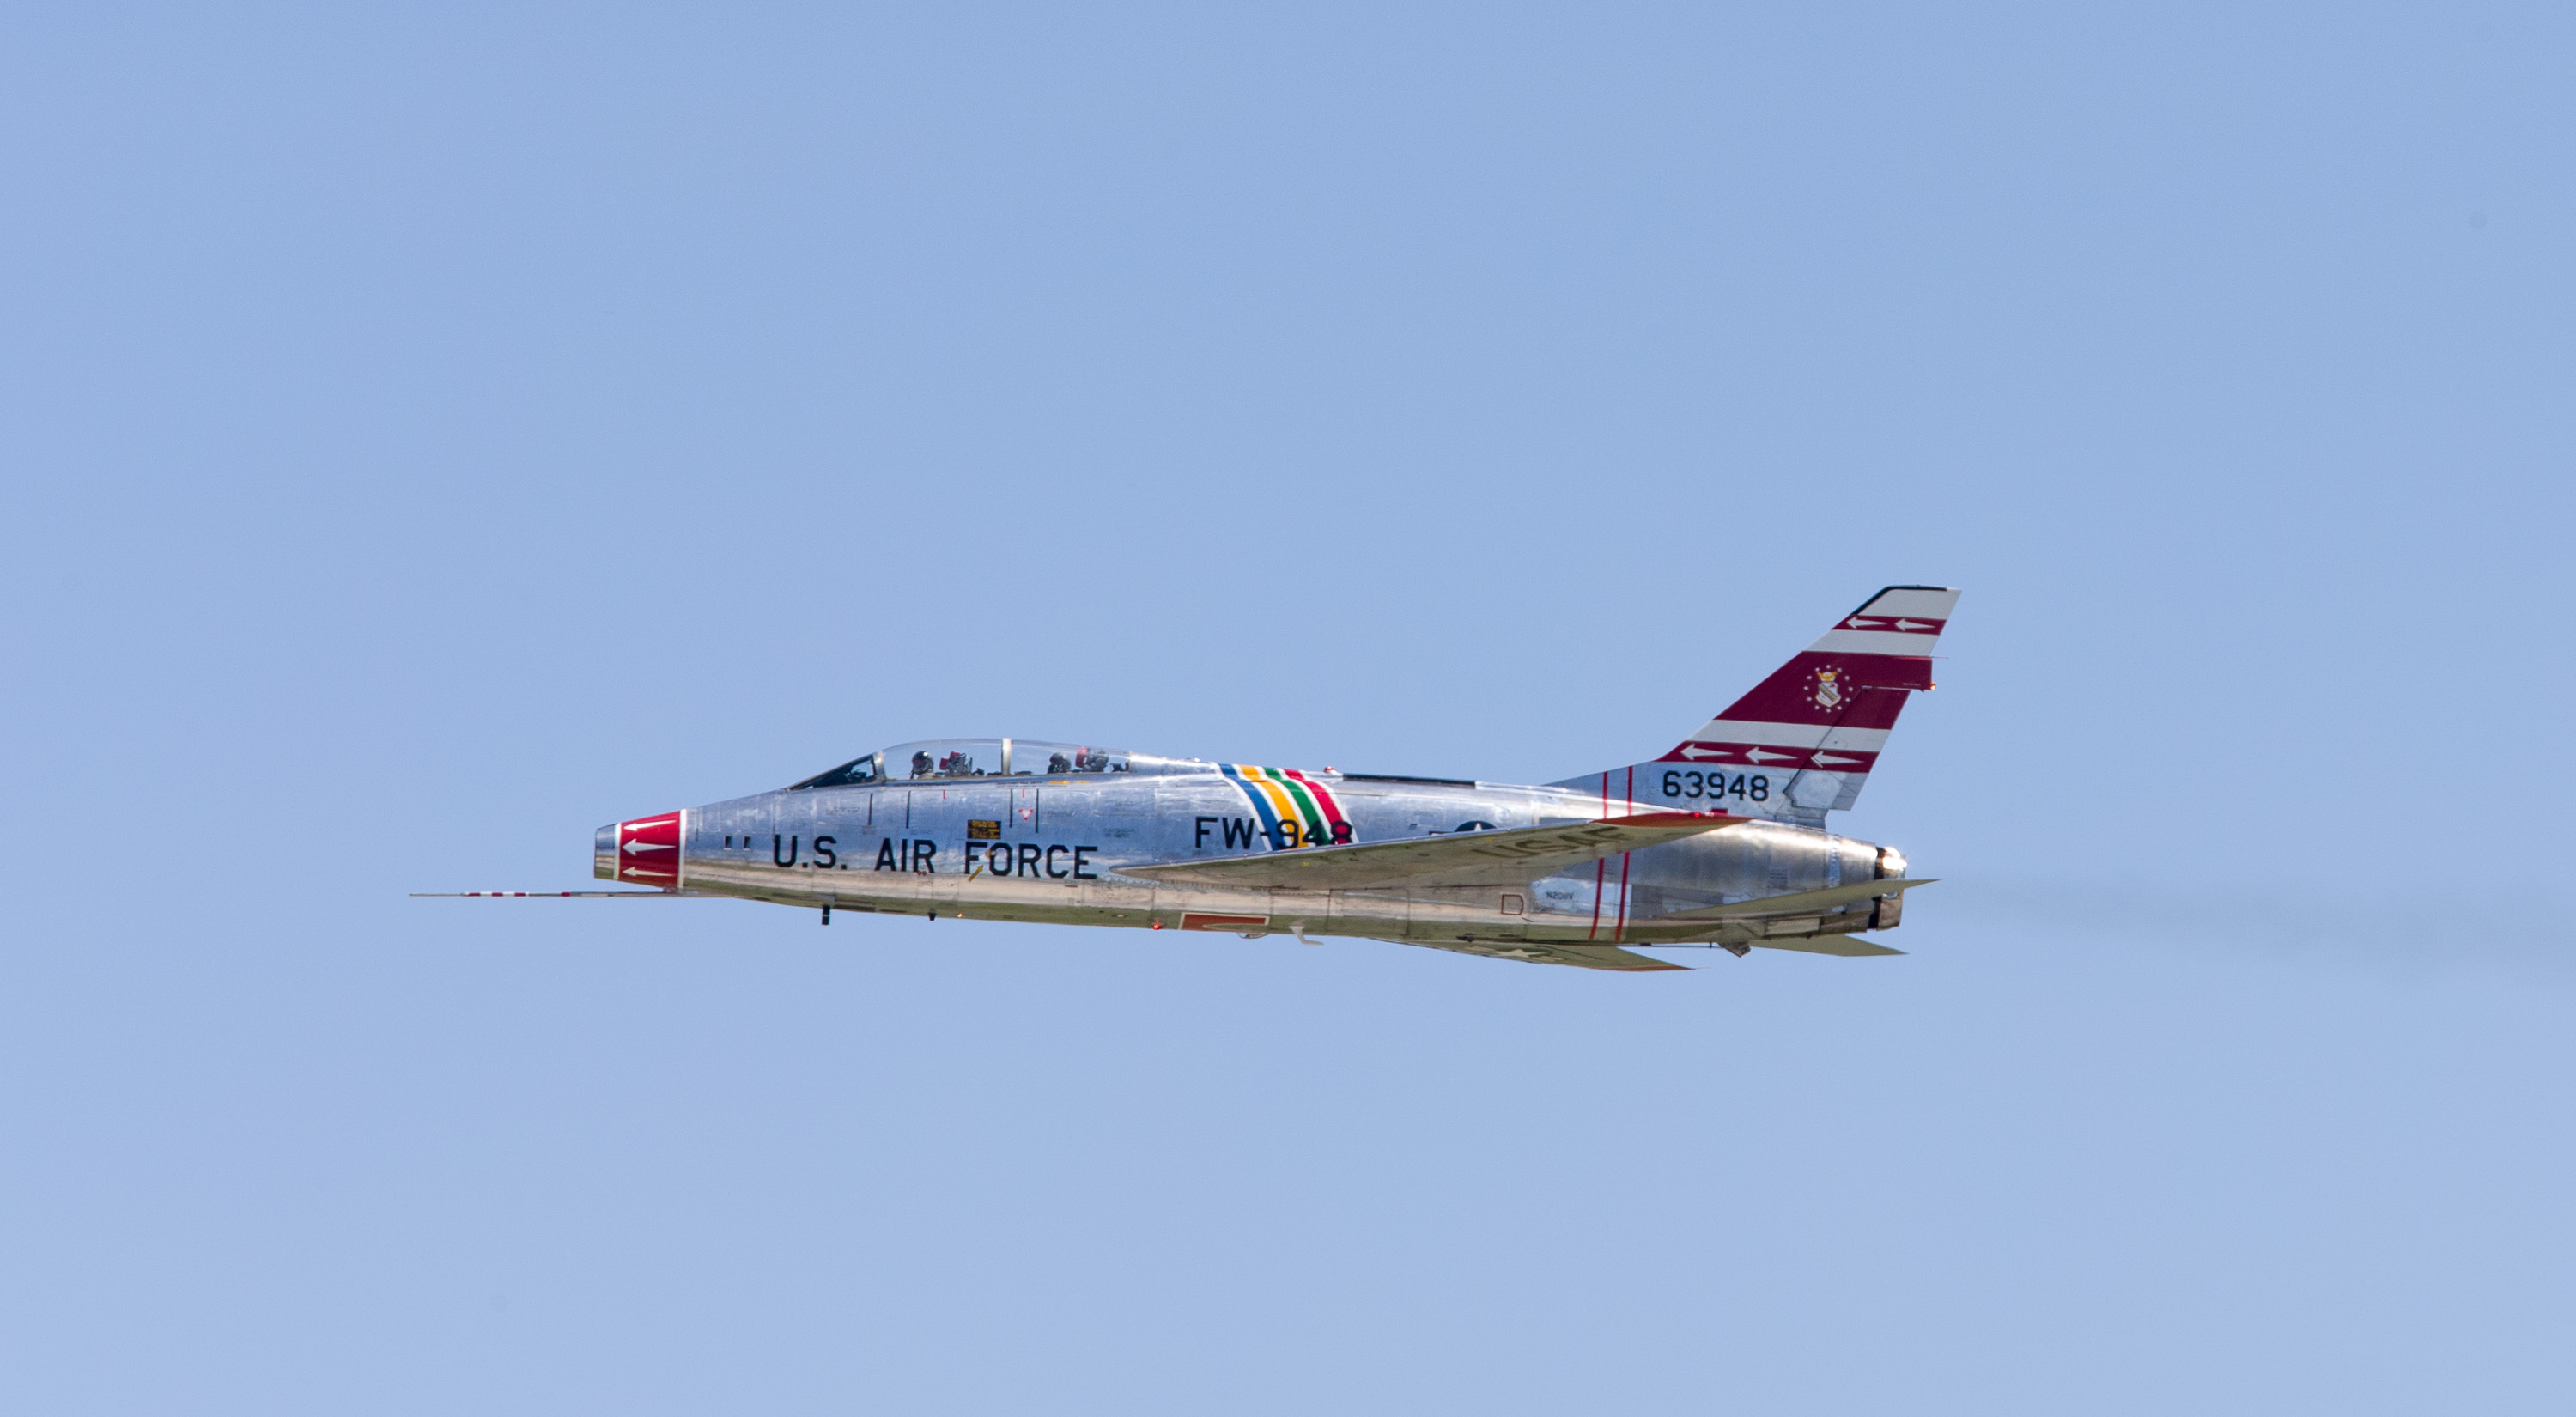 The Super Sabre makes several low passes over Fort Wayne International Airport in Indiana. Photo by Mike Fizer.